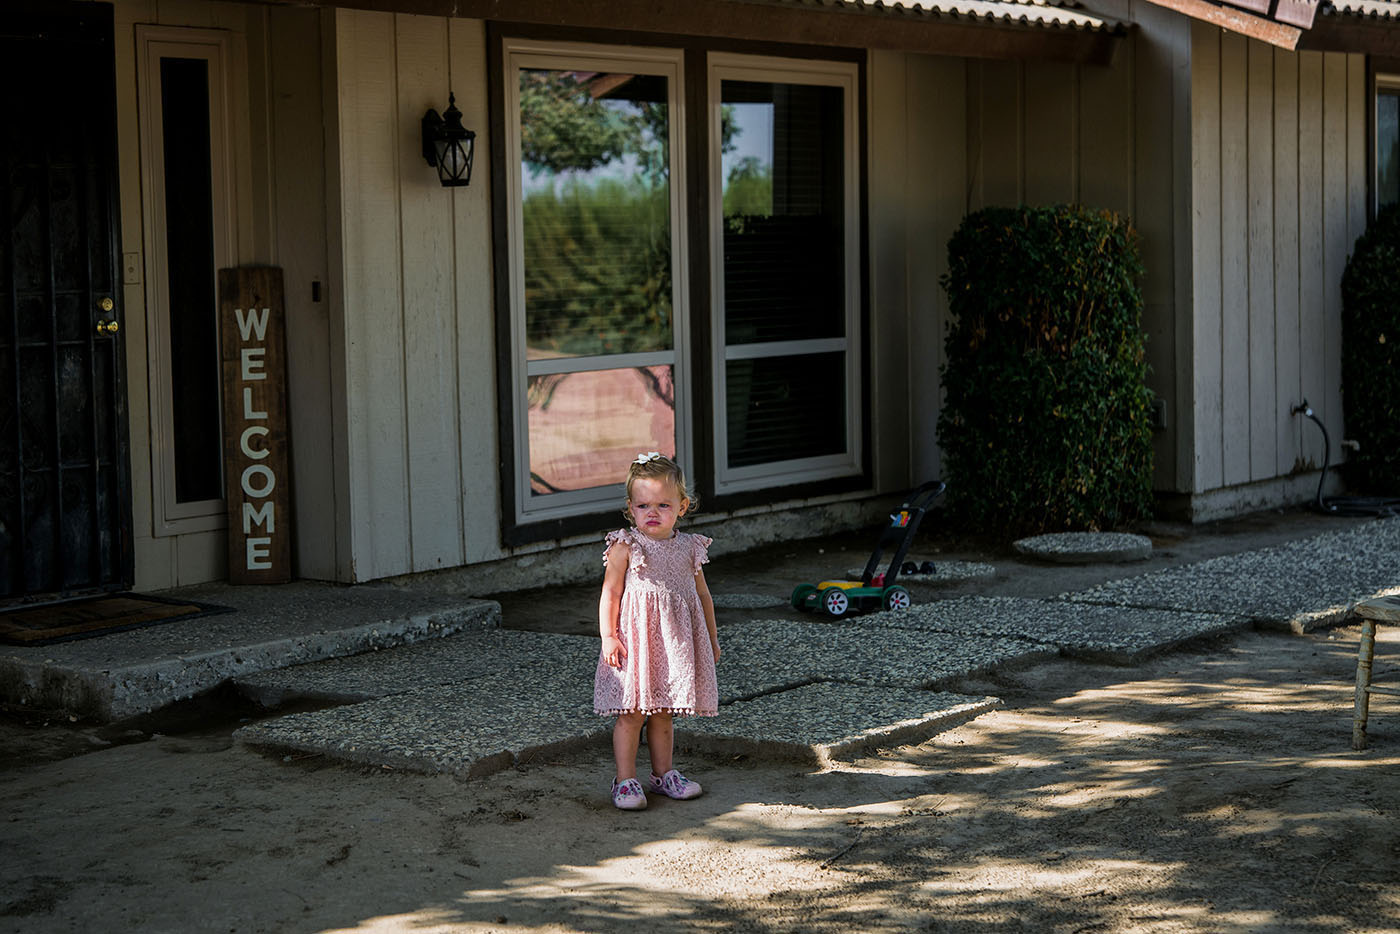 One-year-old Reese Smith’s great-grandfather began her family’s farming tradition in Hanford, California